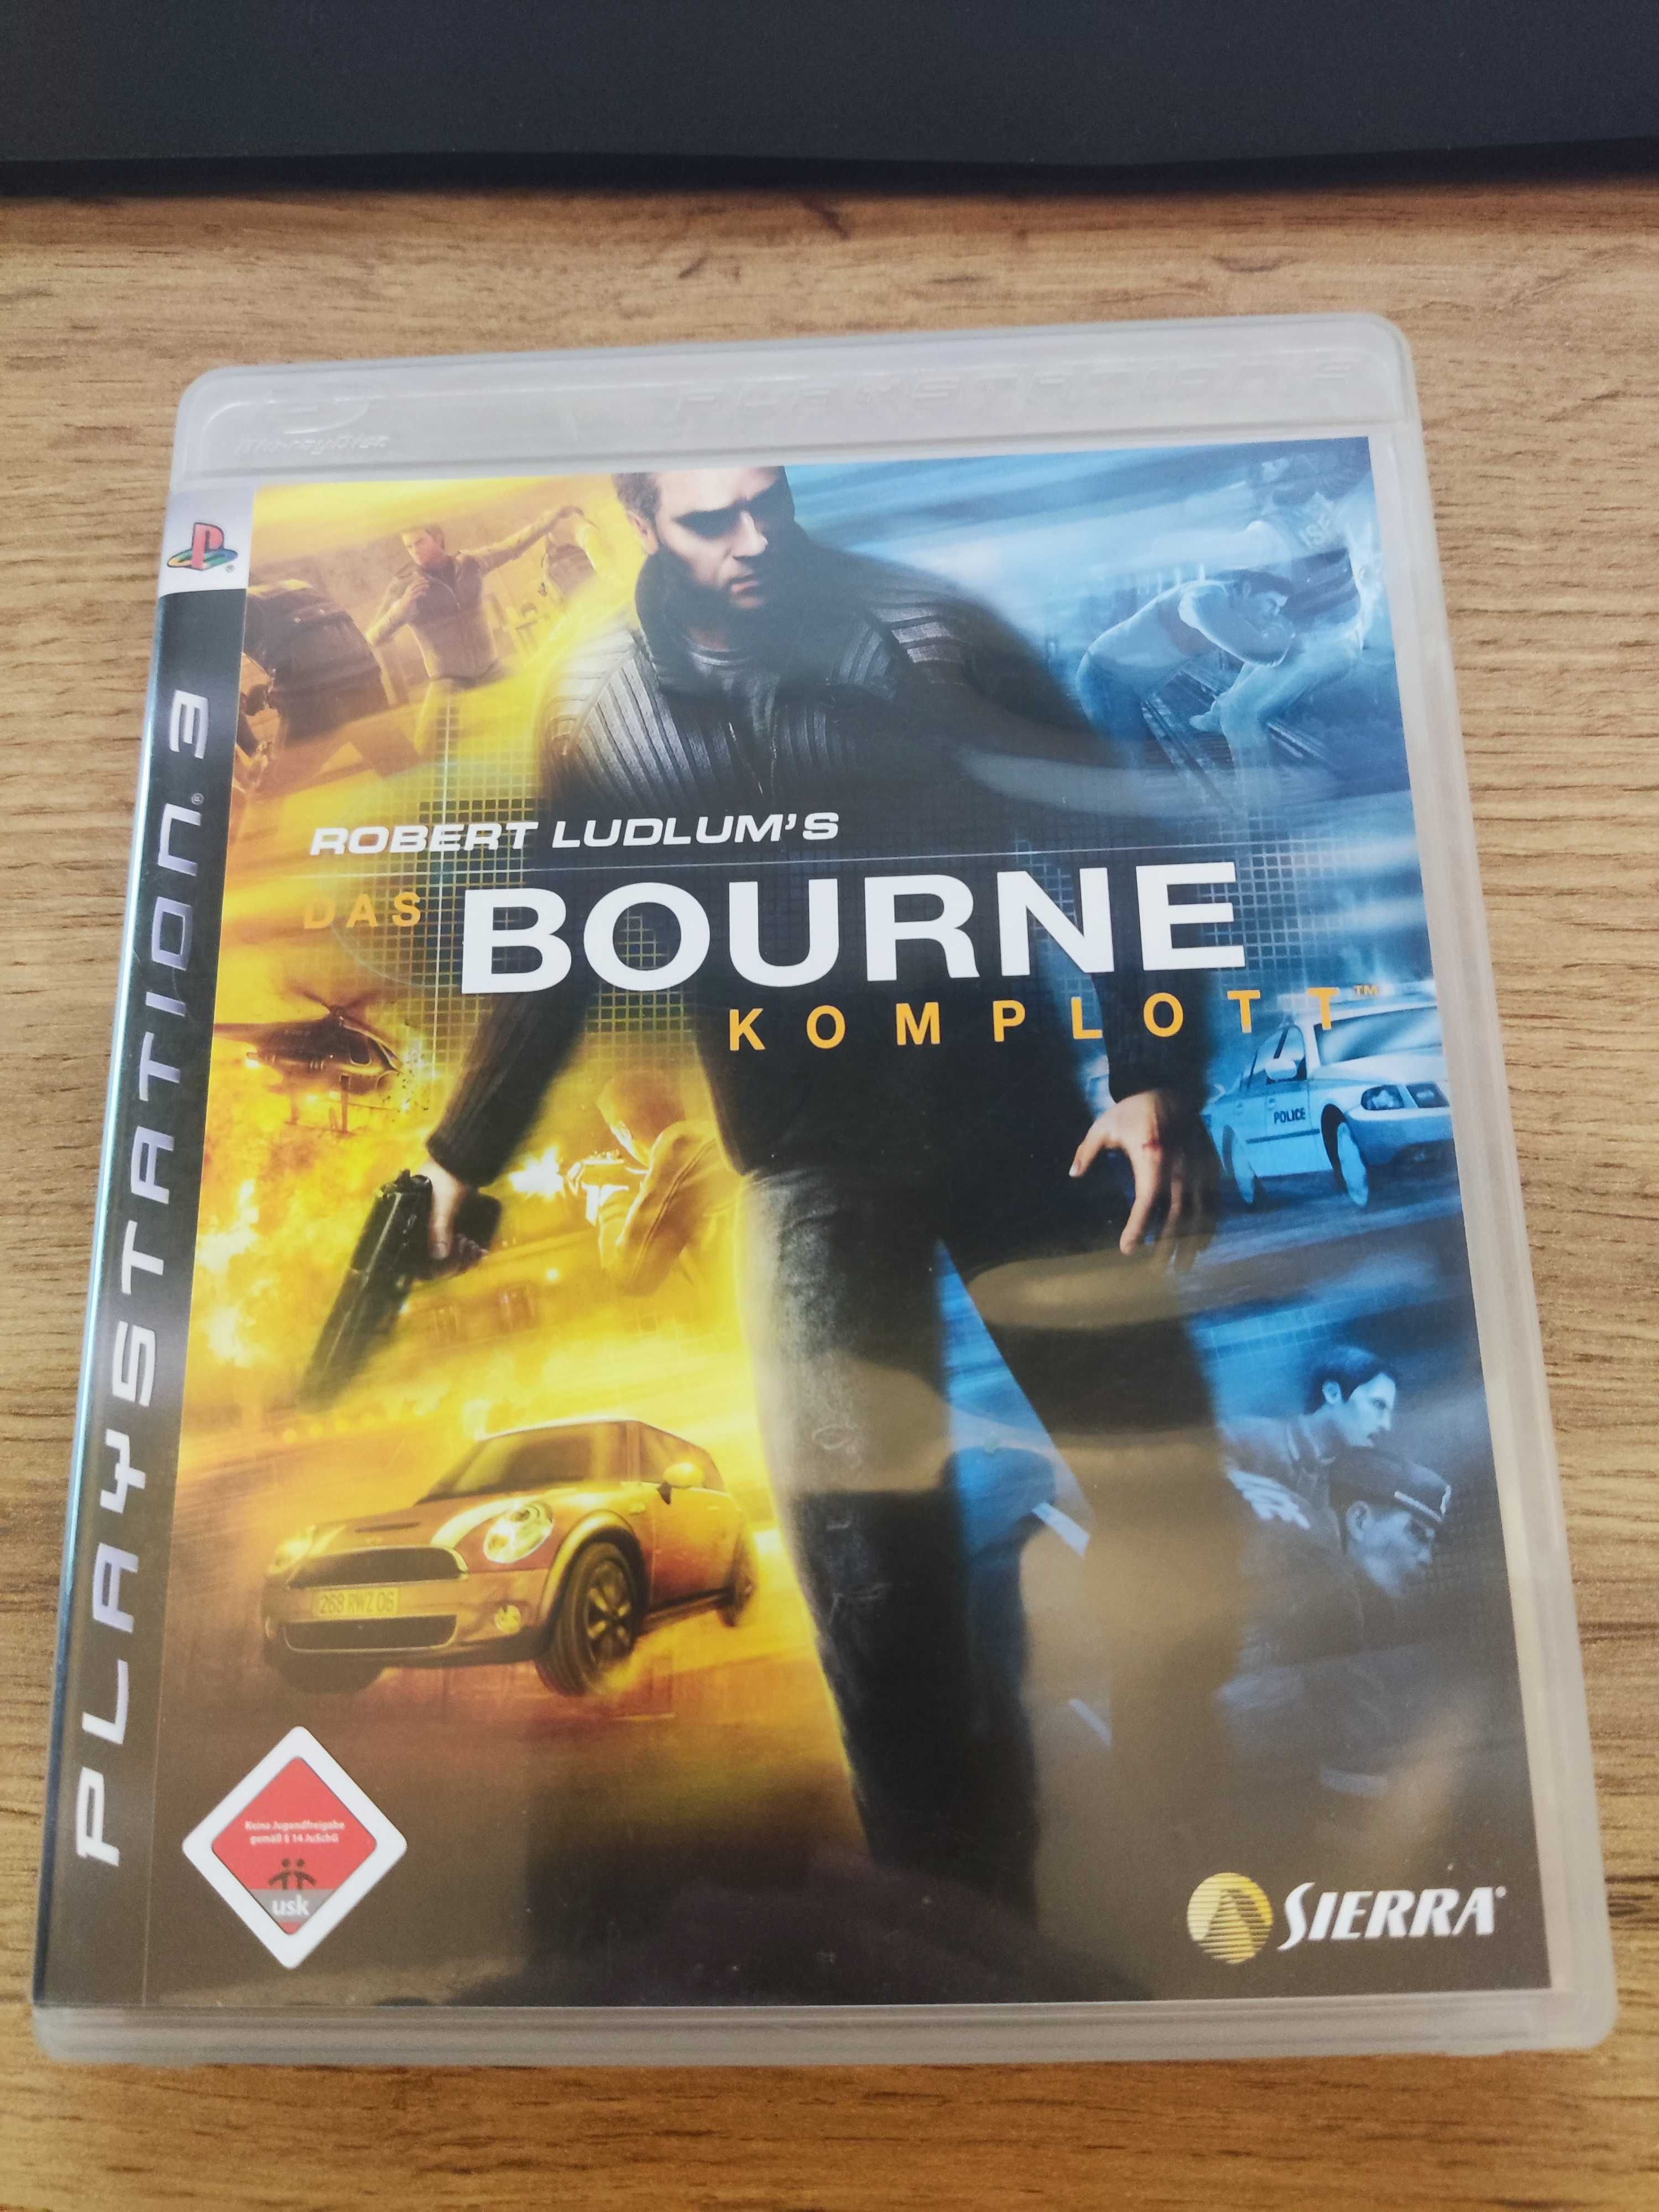 The Bourne Conspiracy Playstation 3 PS3